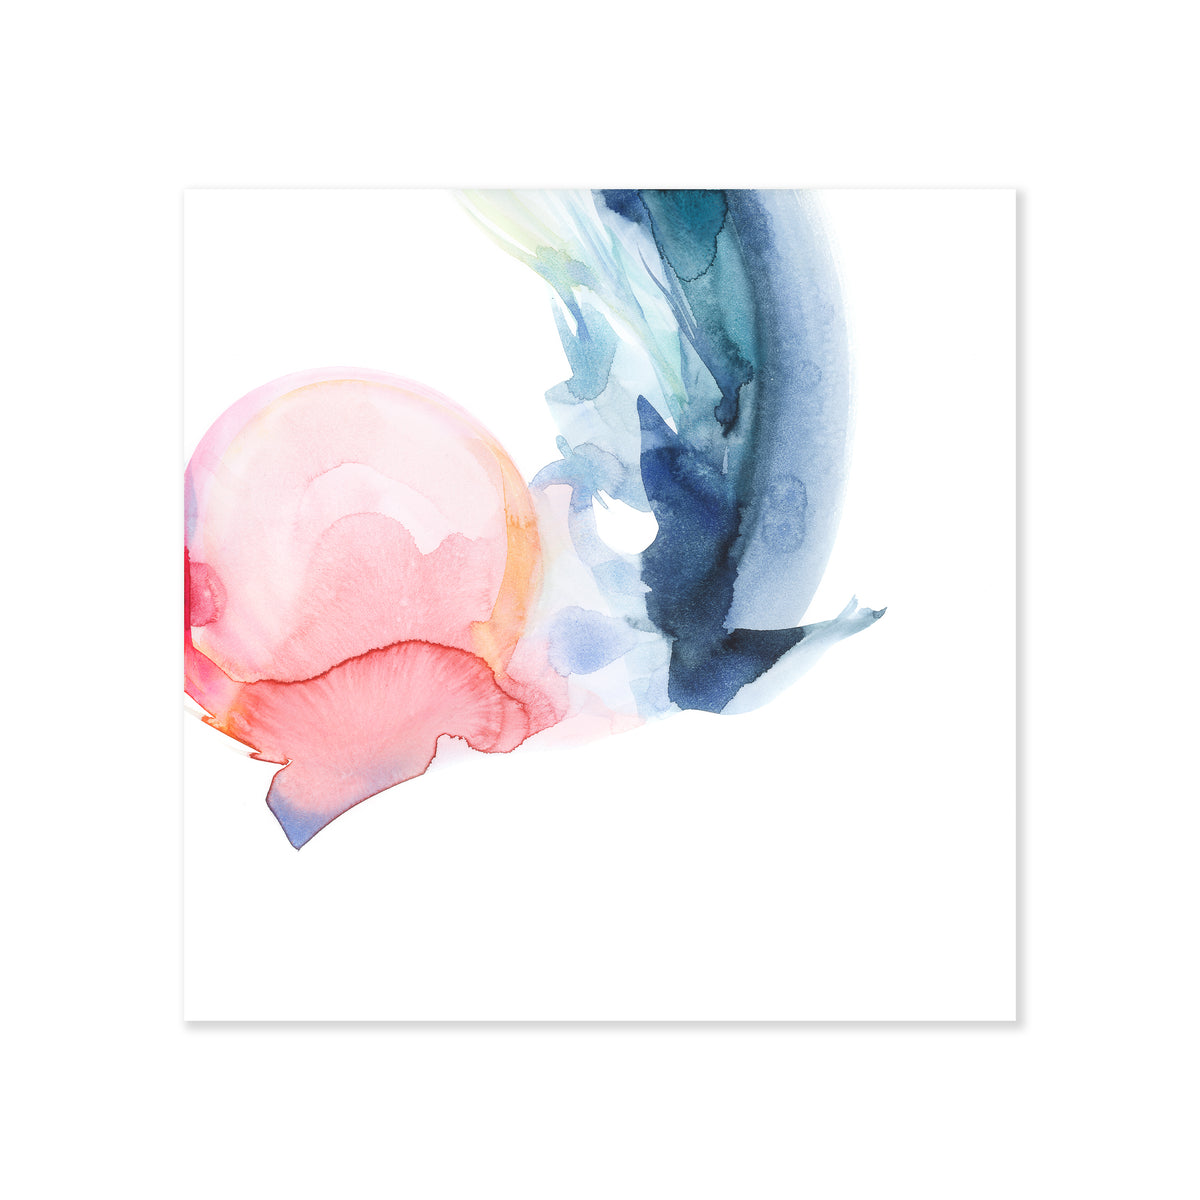 An abstract fine art print featuring pink and blue watercolors on a soft white background